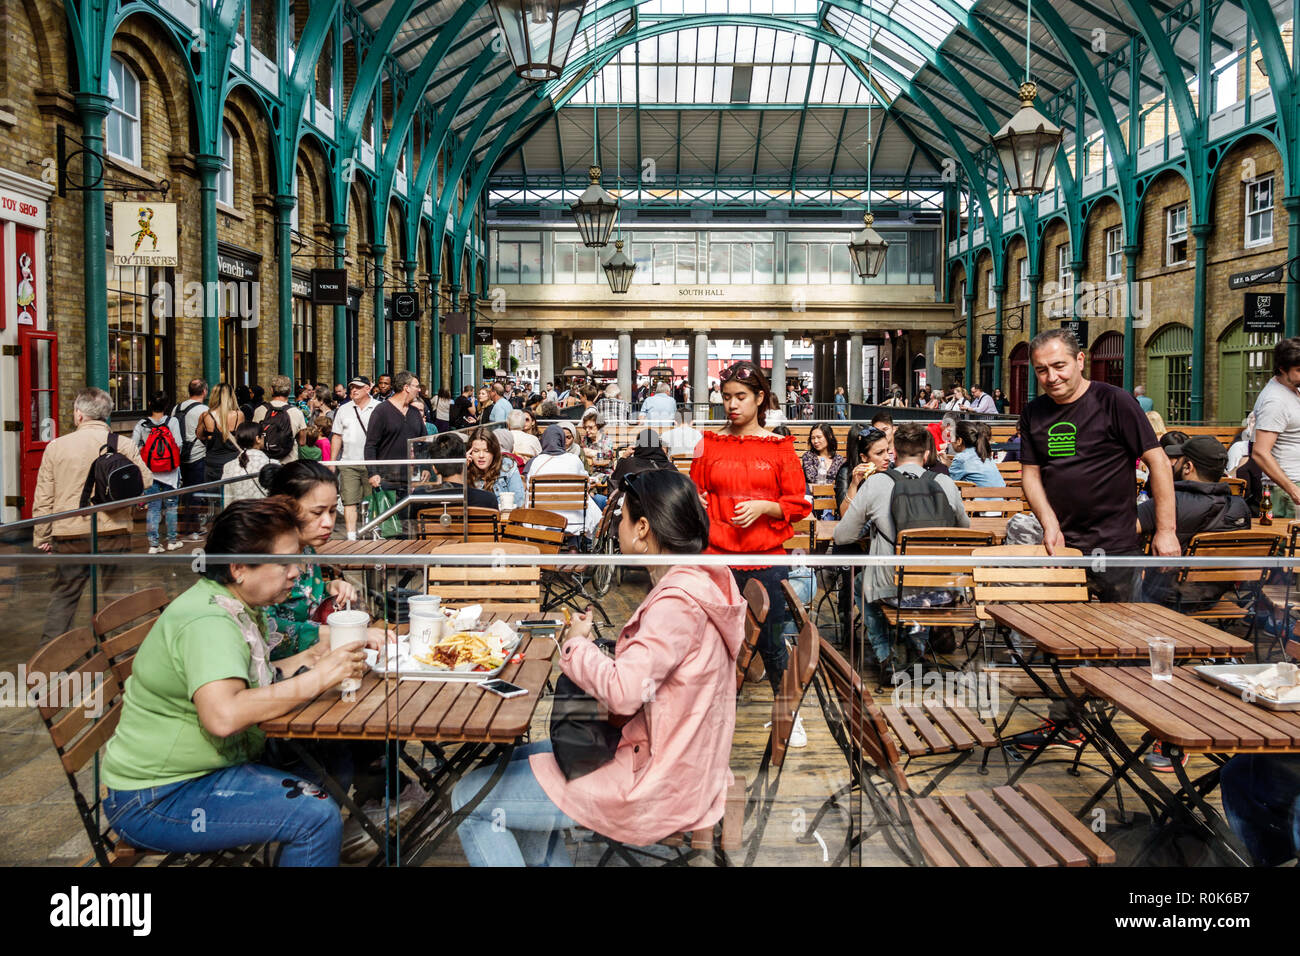 London England,UK Covent Garden,market,shopping dining entertainment,Apple Market,Charles Fowler,neo-classical building central hall,1830,tables seati Stock Photo